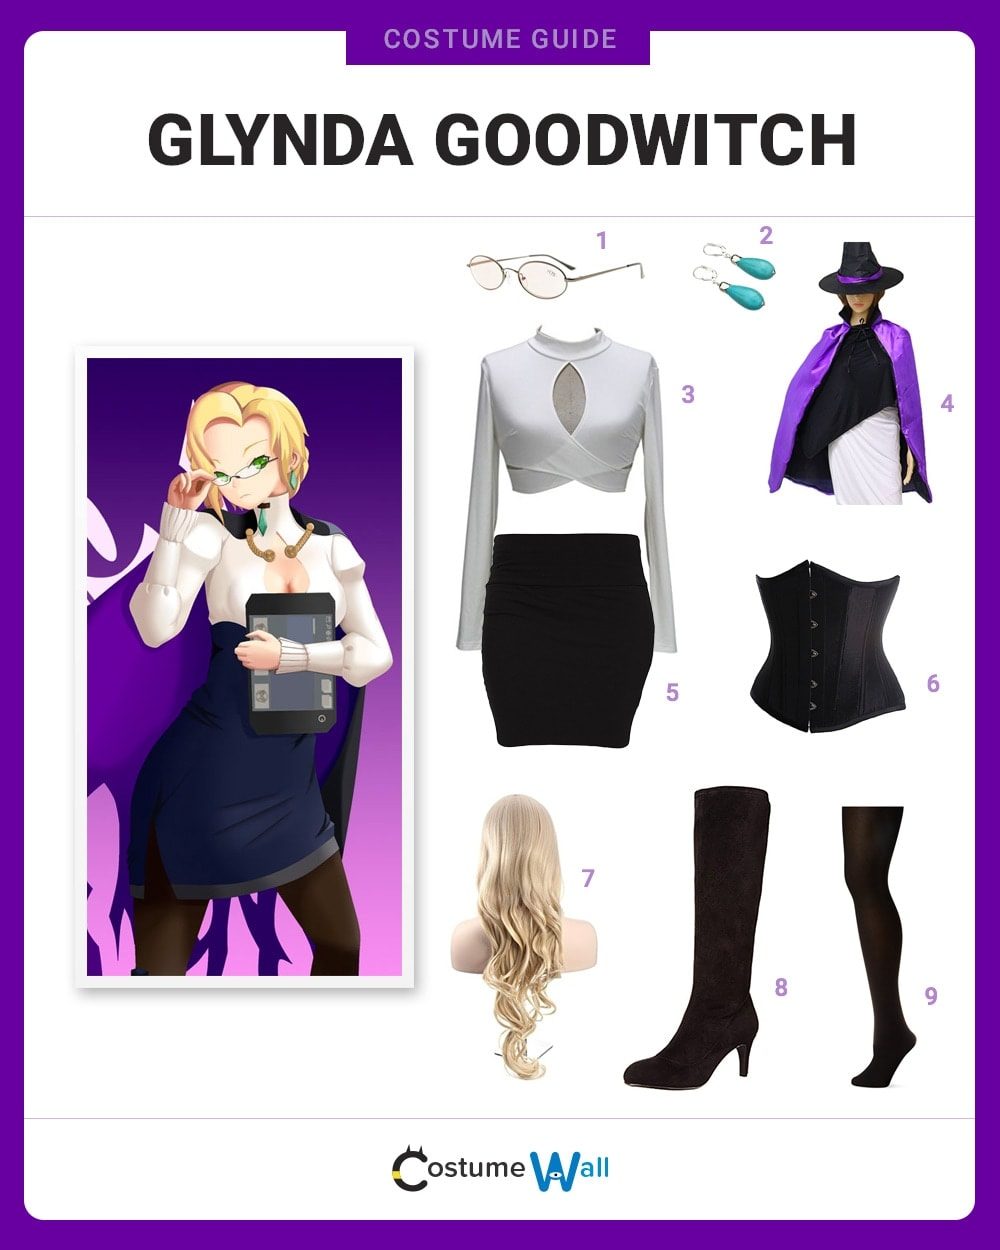 Glynda Goodwitch Costume Guide